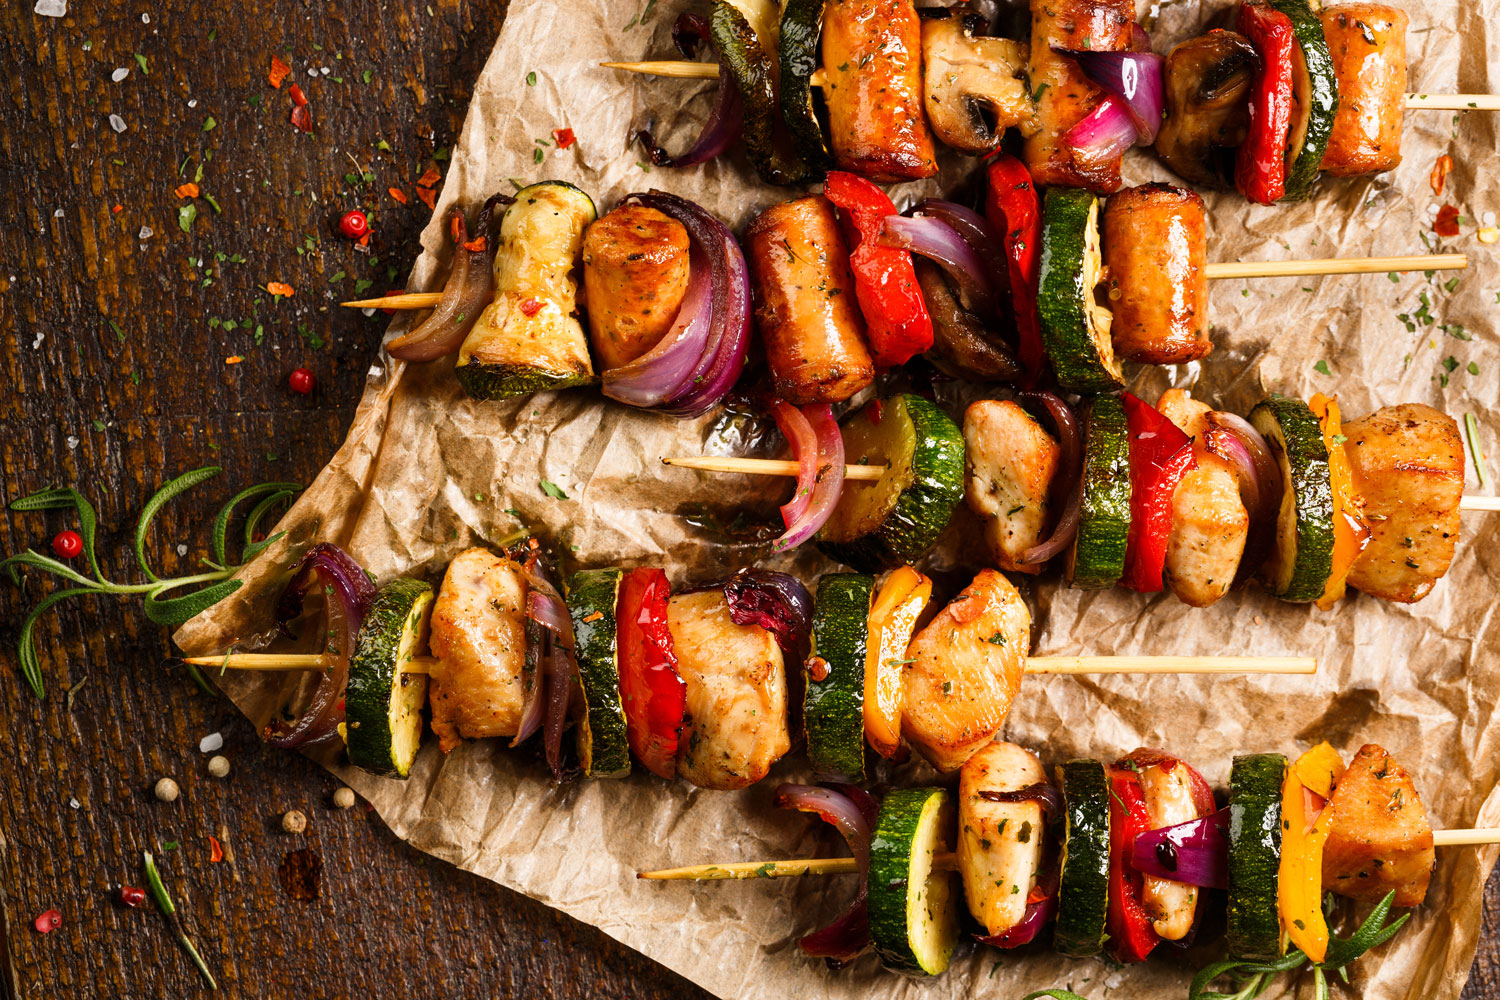 Hot Tips For Healthy Grilling